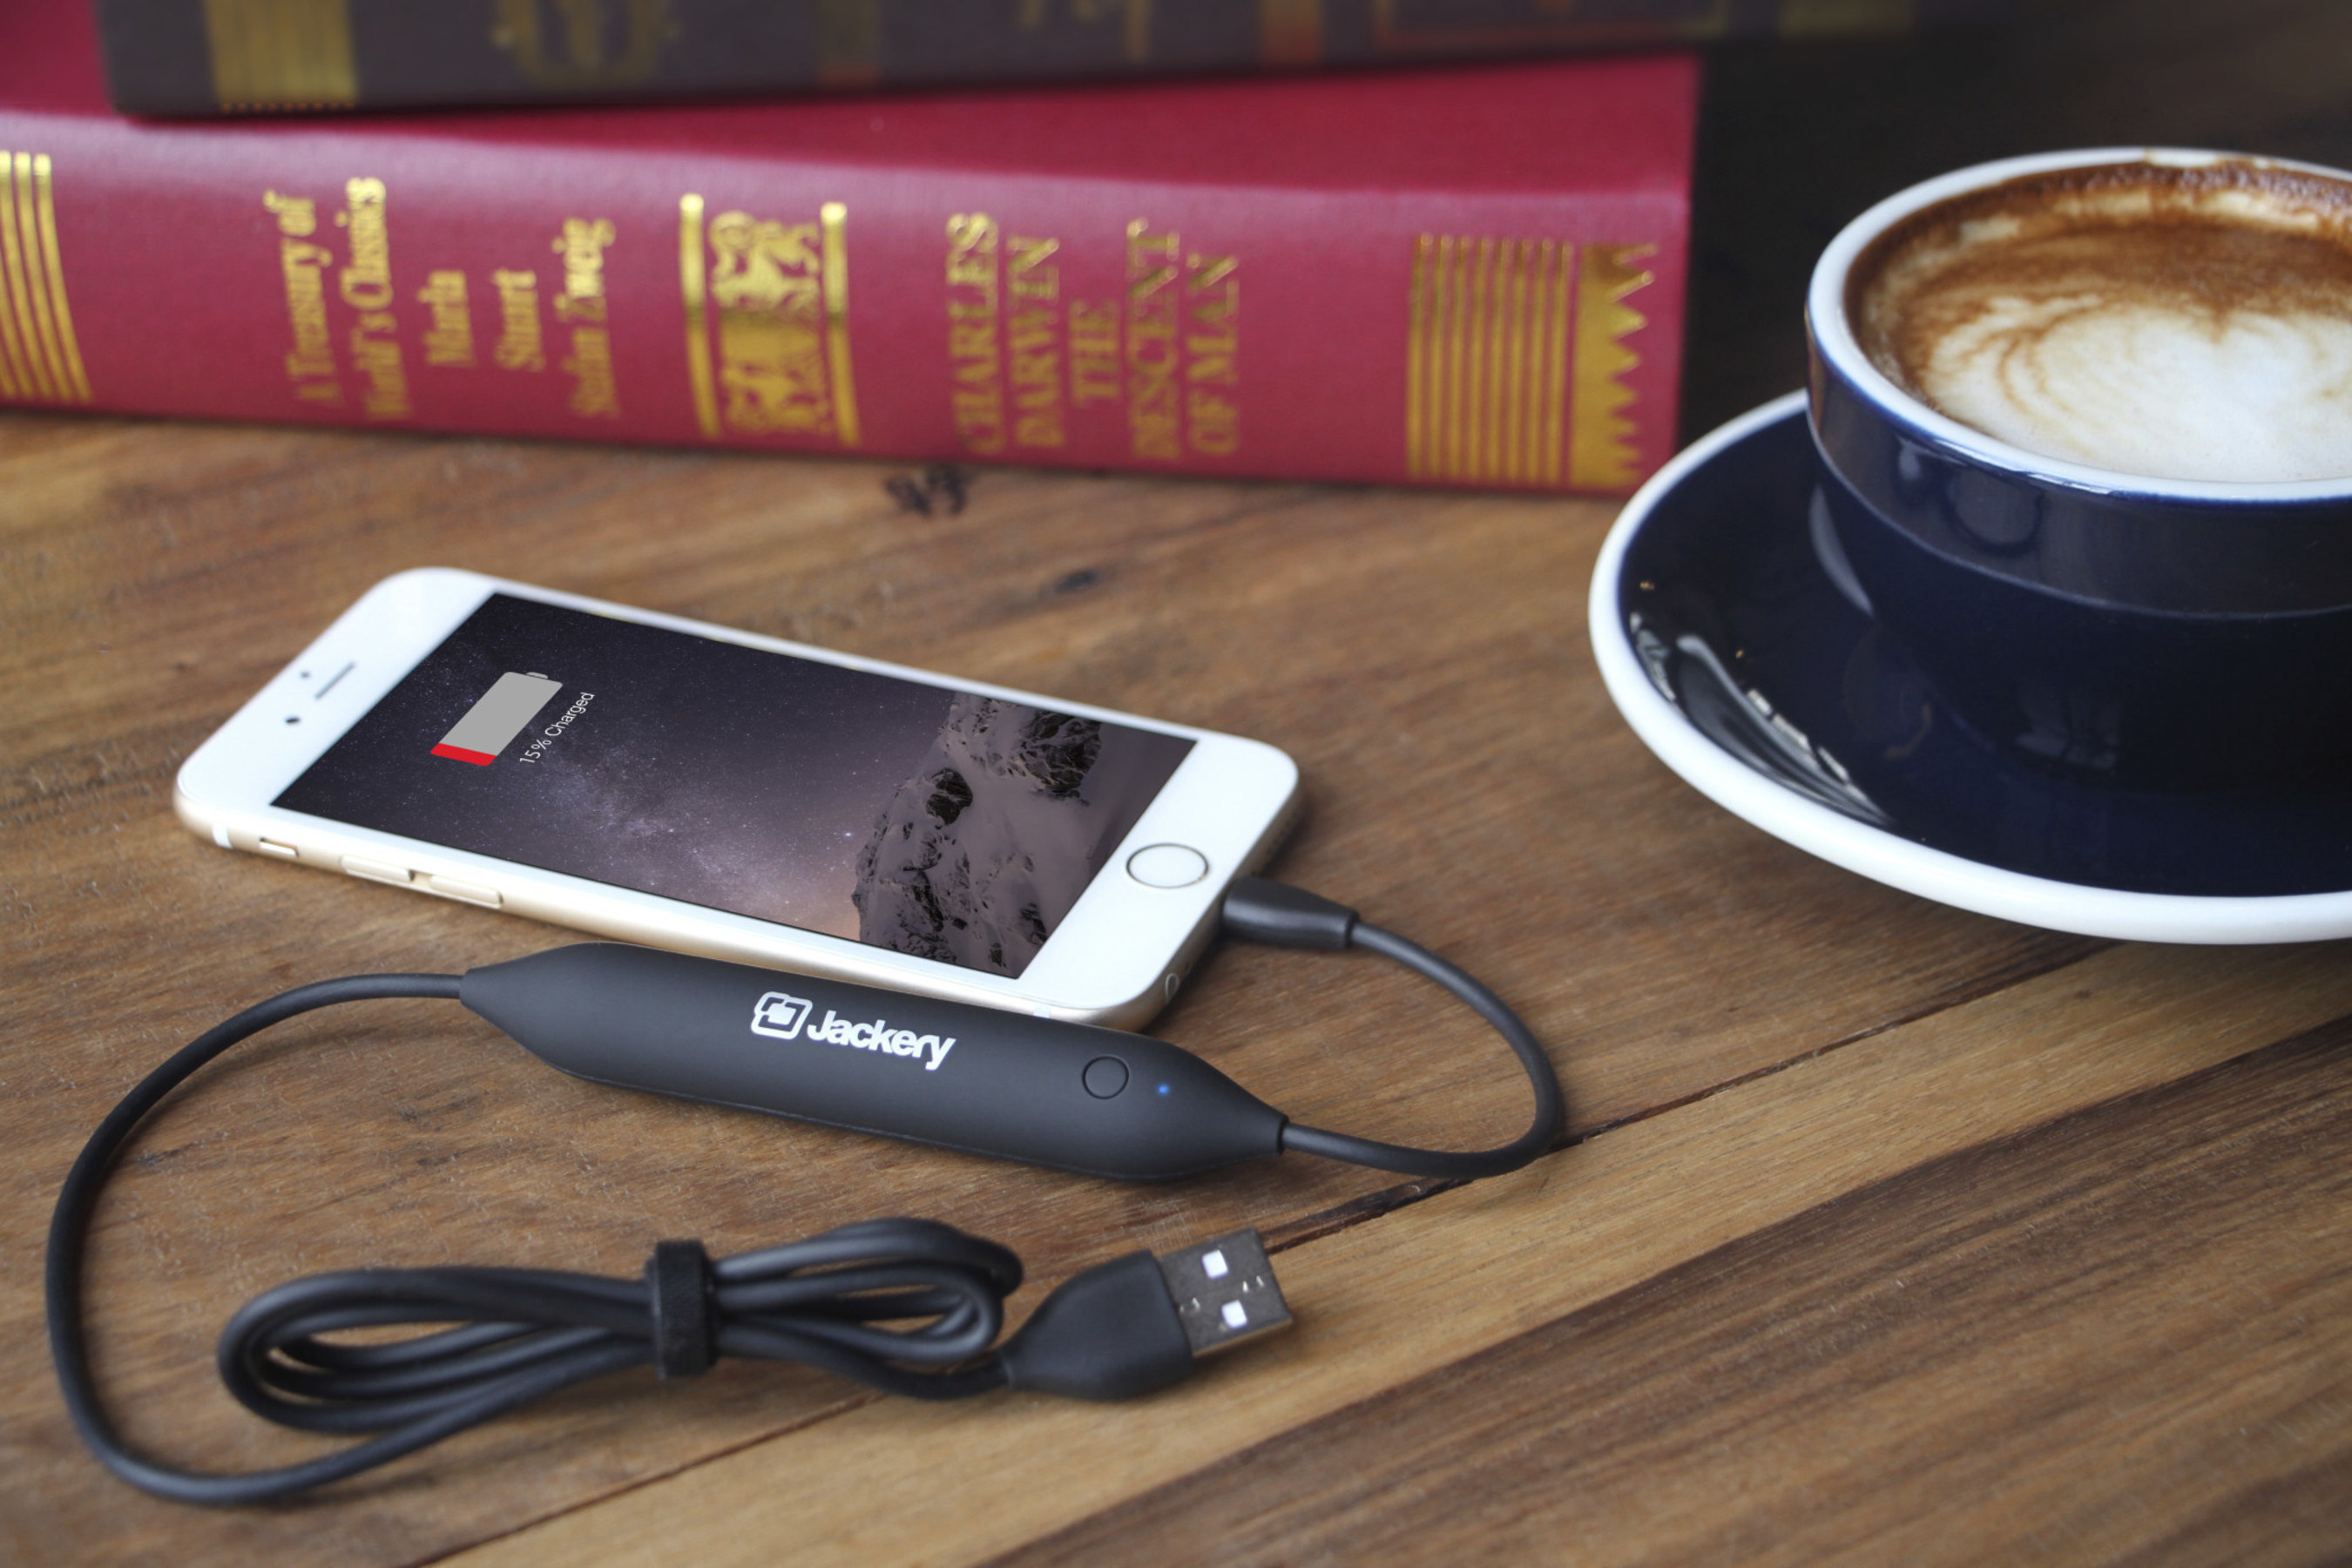 "The Jackery Jewel 2-in-1 Lightning Power Cable with Integrated Battery"